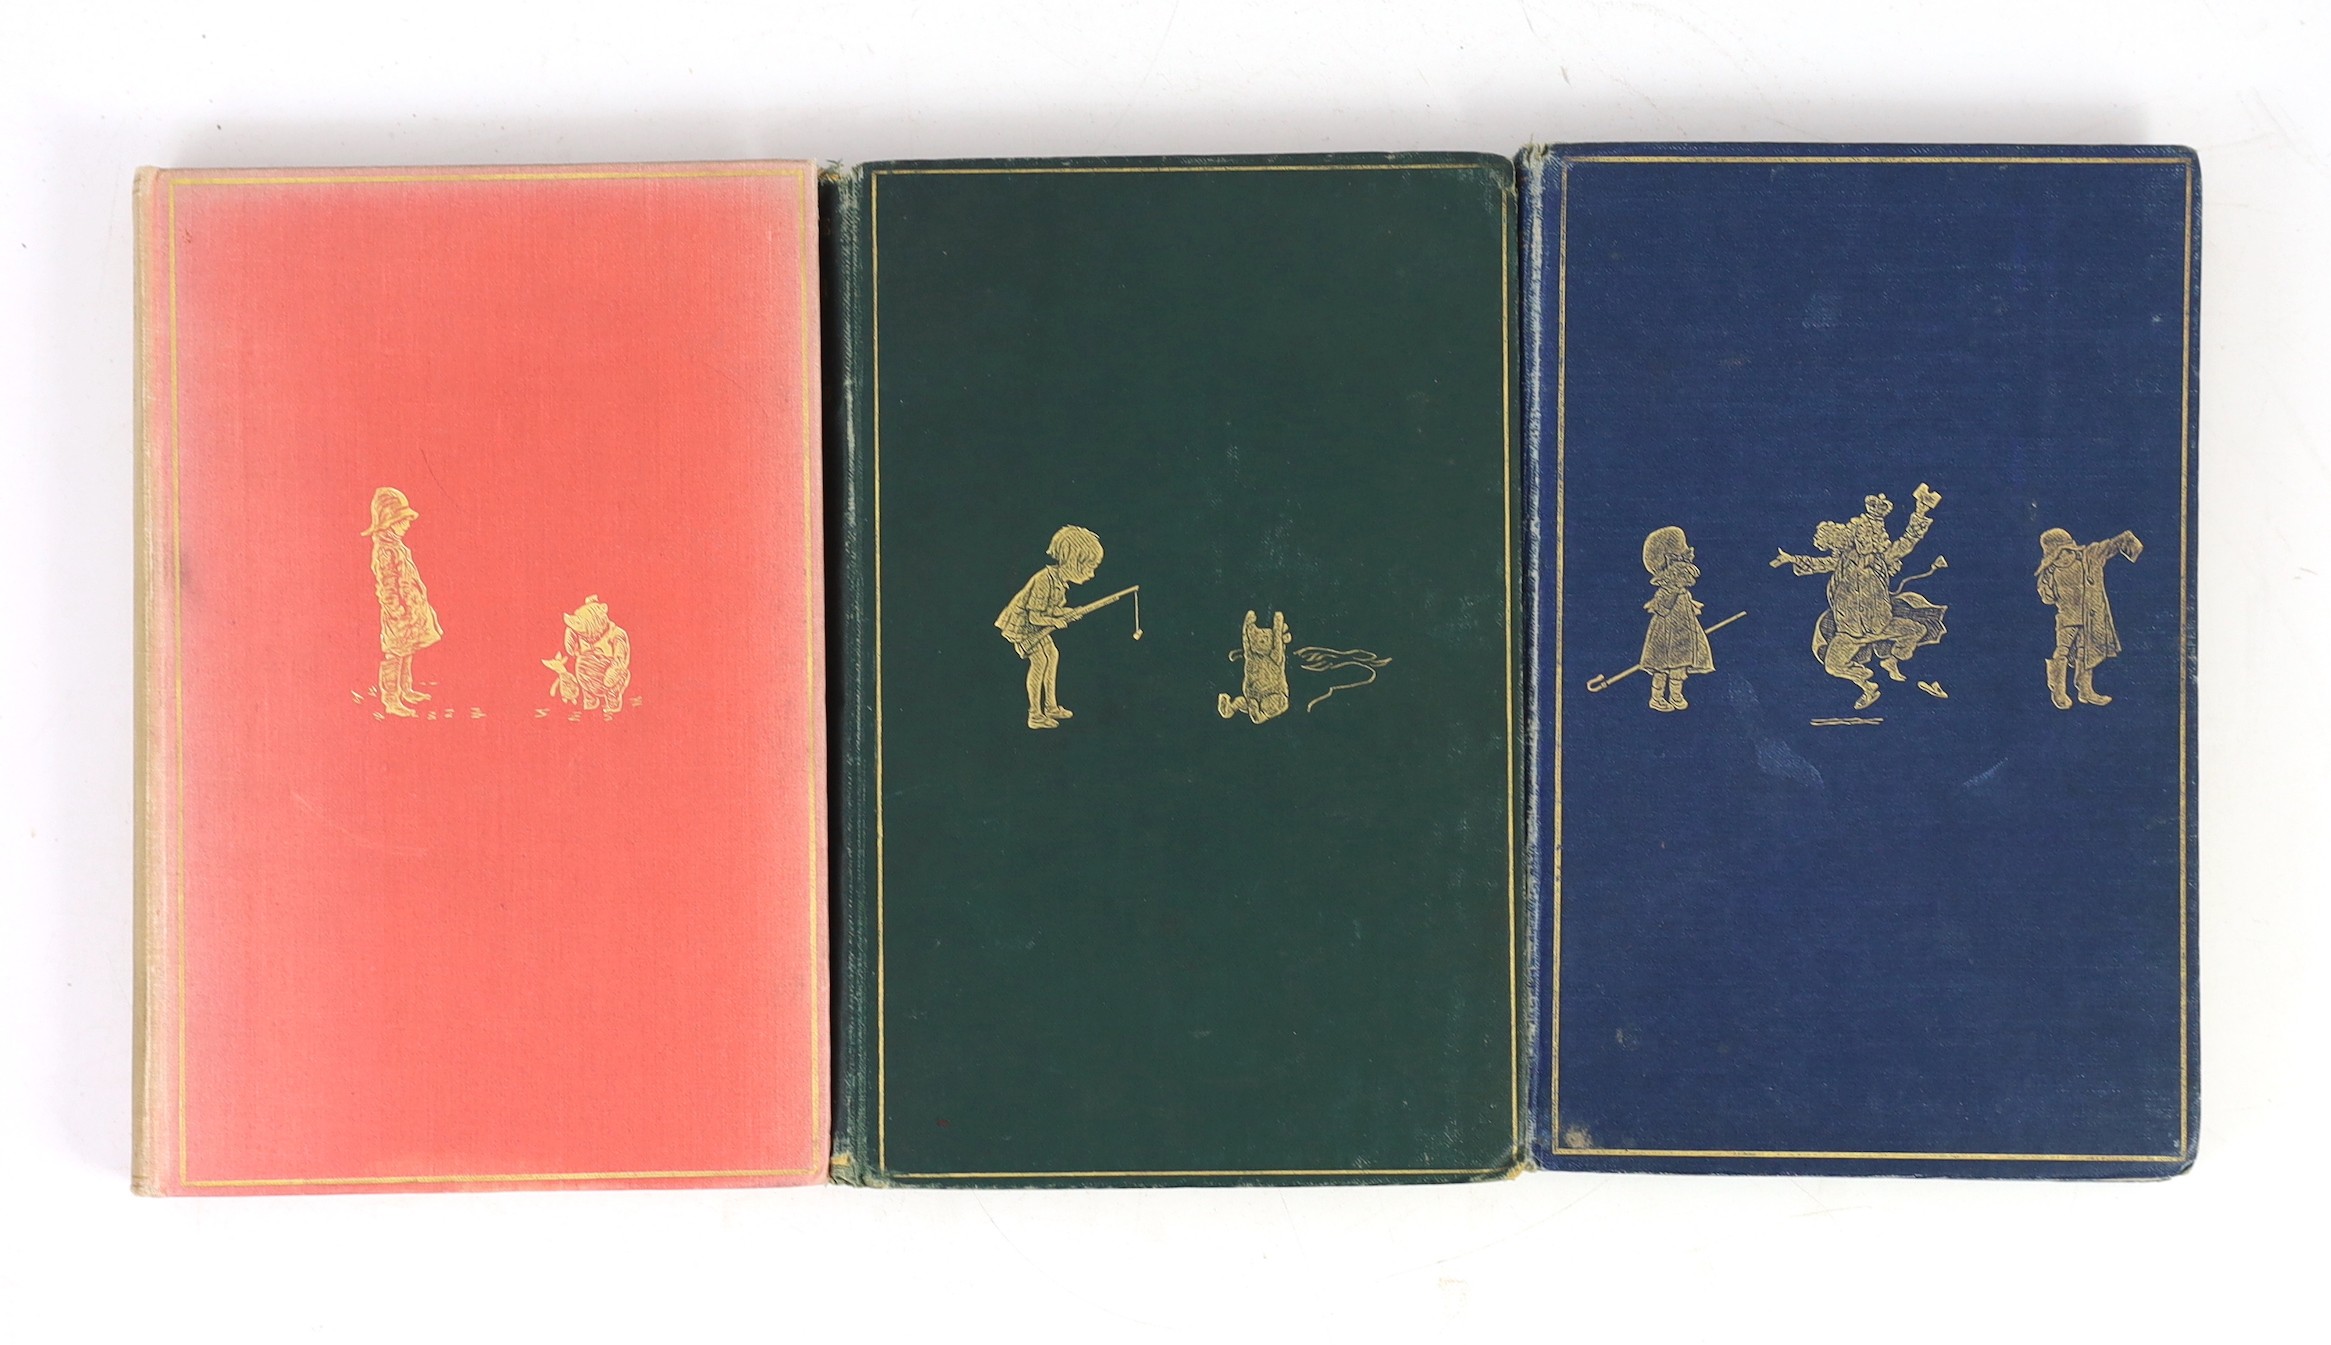 Milne, A. A - 7 works, all illustrated by Ernest Shepard - When We Were Very Young, 4th edition, 1924; Winnie-The-Pooh, 1st edition, 1926; The House at Pooh Corner, 2 copies, both 1st editions, 1928; Now We Are Six, 2 co